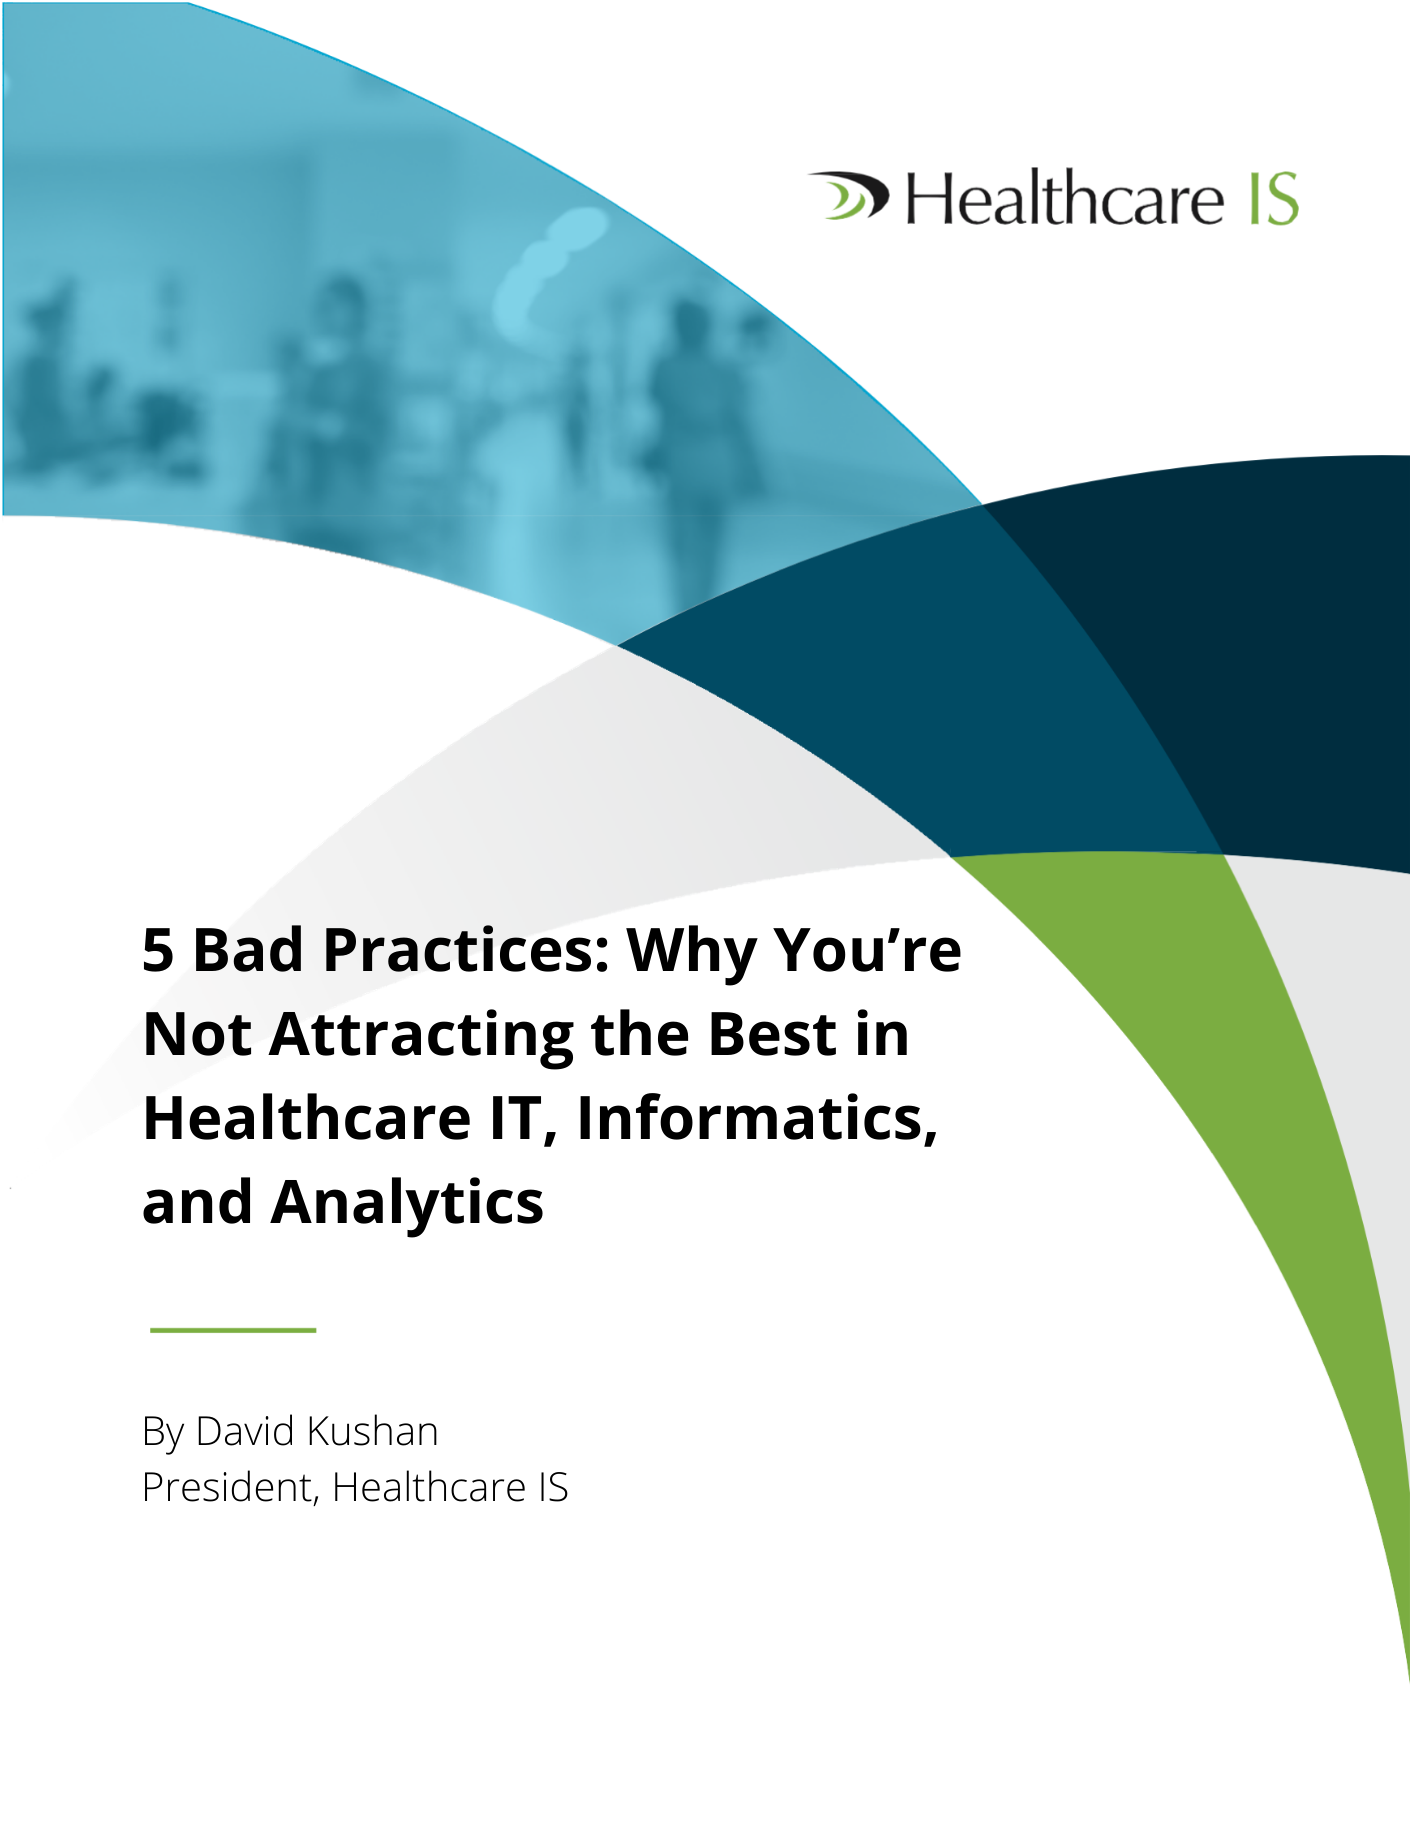 5 Bad Practices Why You’re Not Attracting the Best in Healthcare IT, Informatics, and Analytics